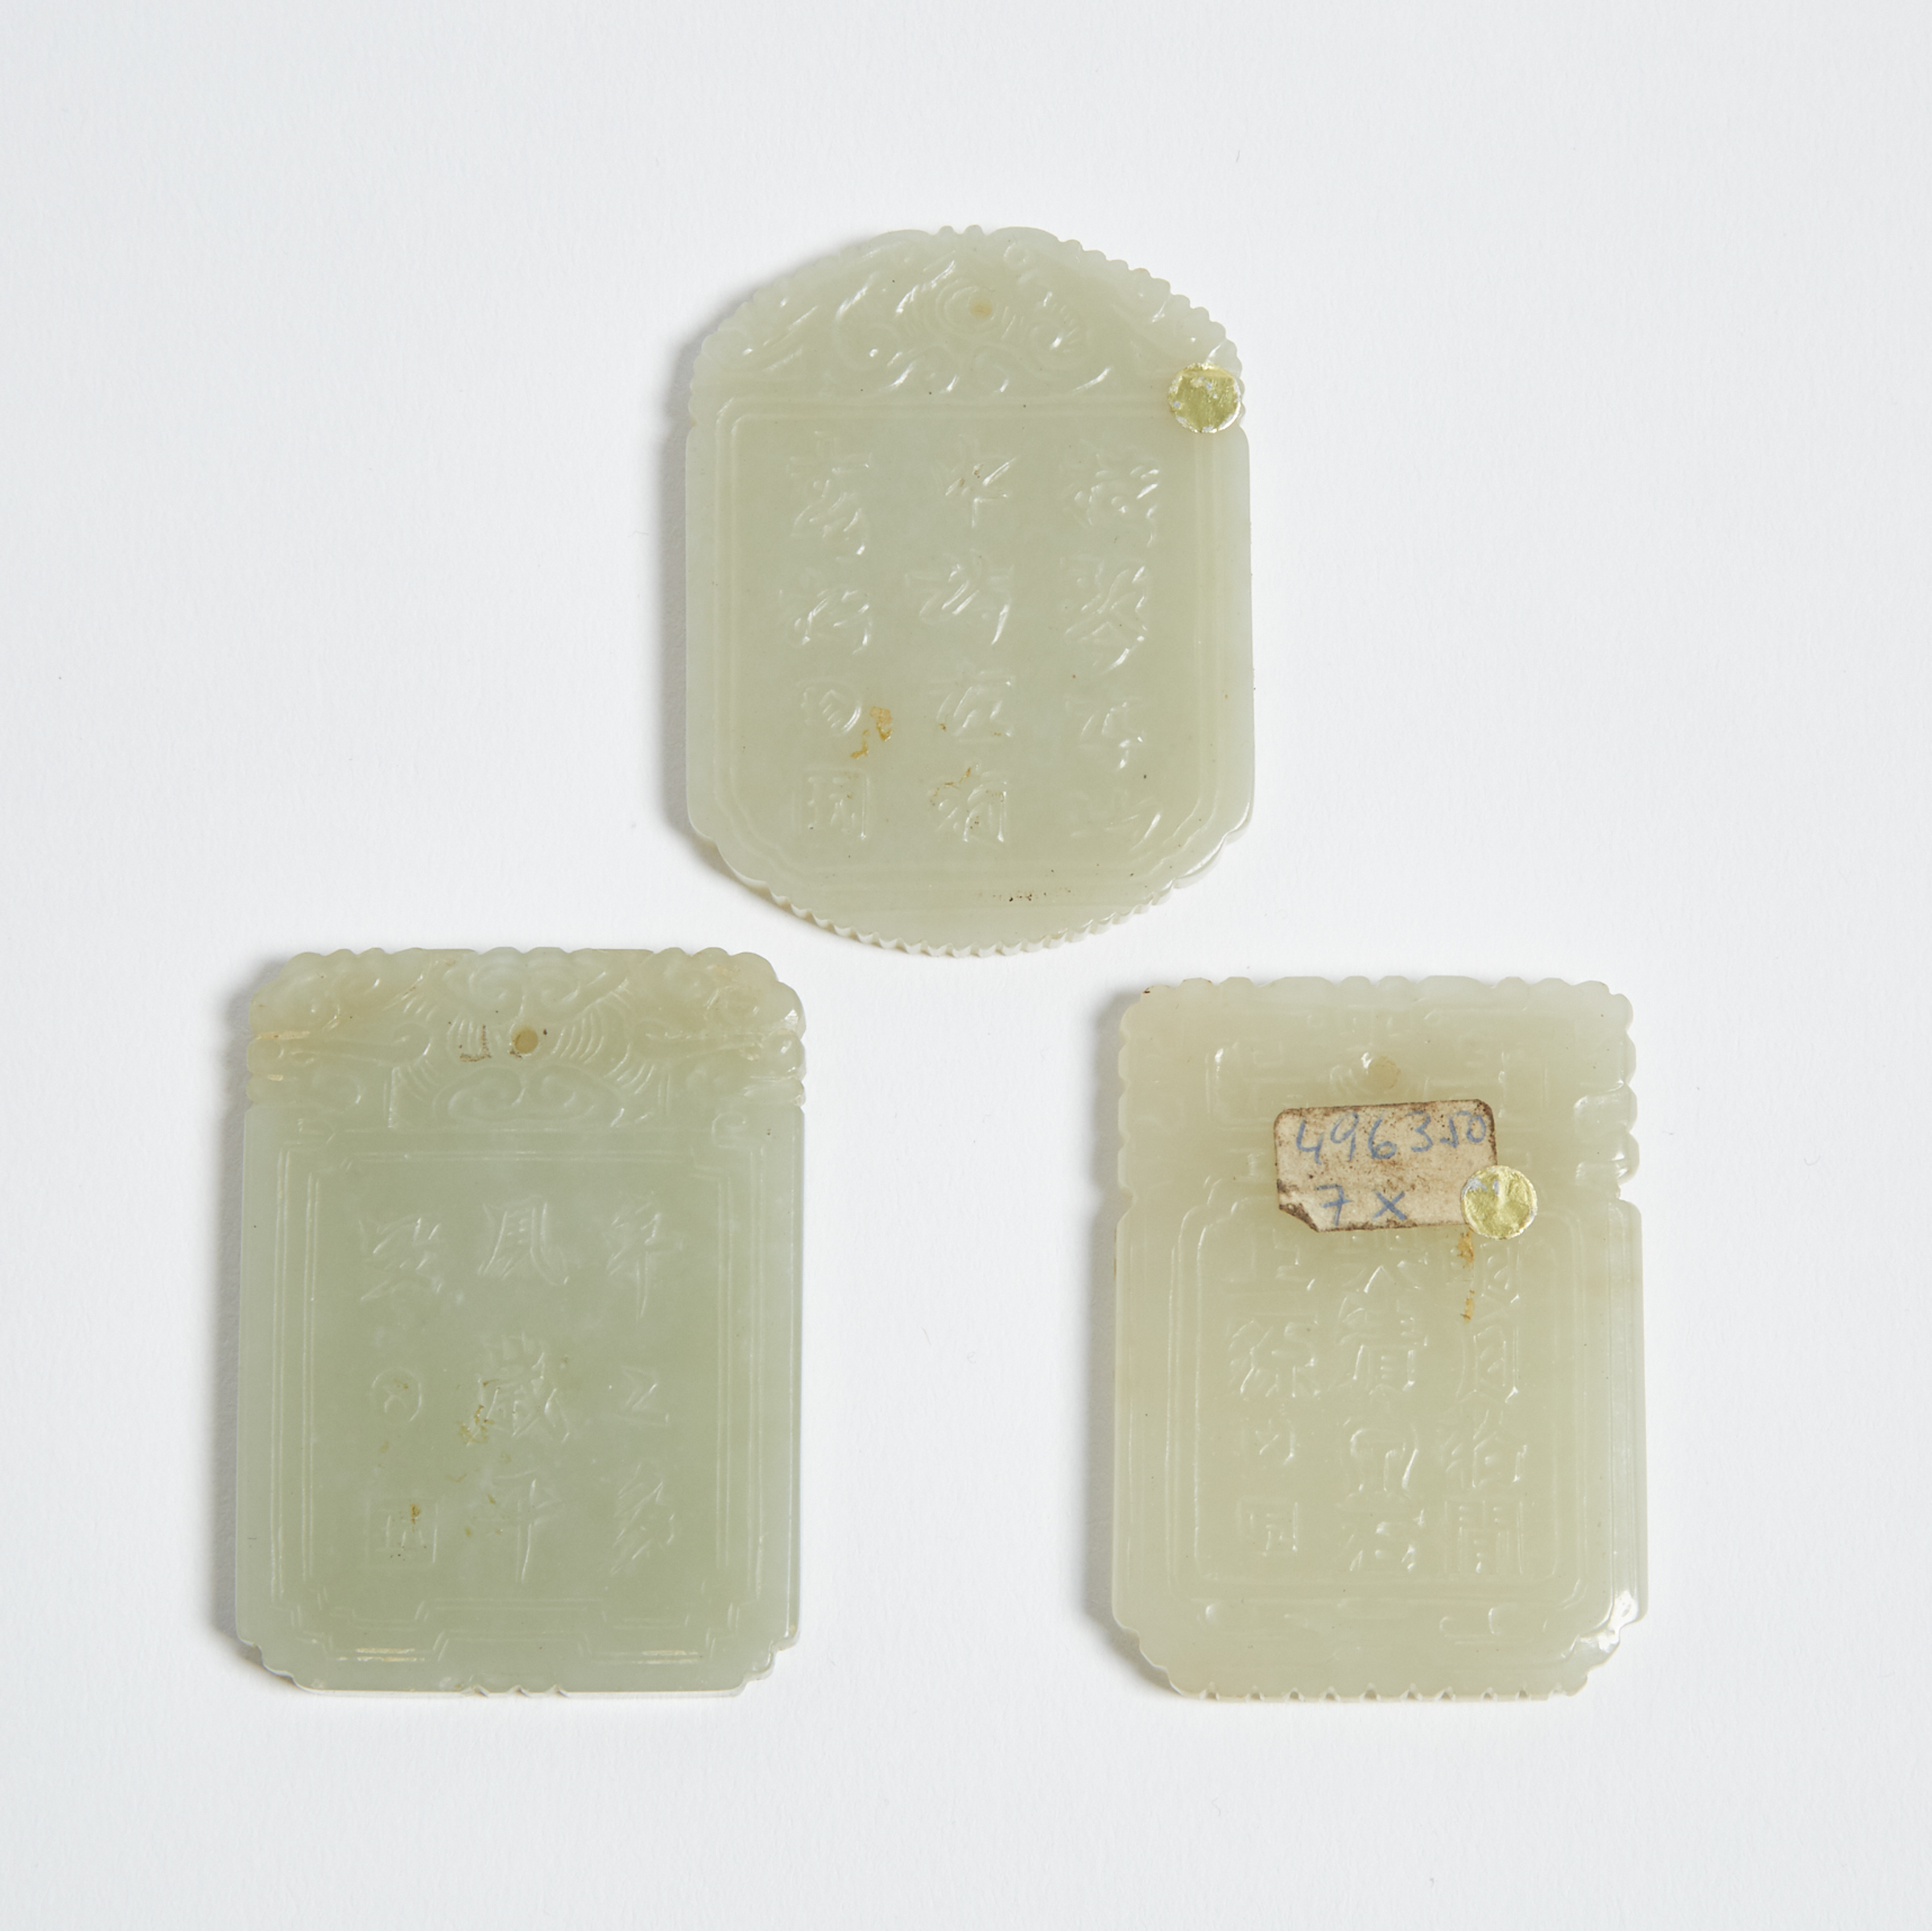 A Group of Three Celadon White Jade Plaques